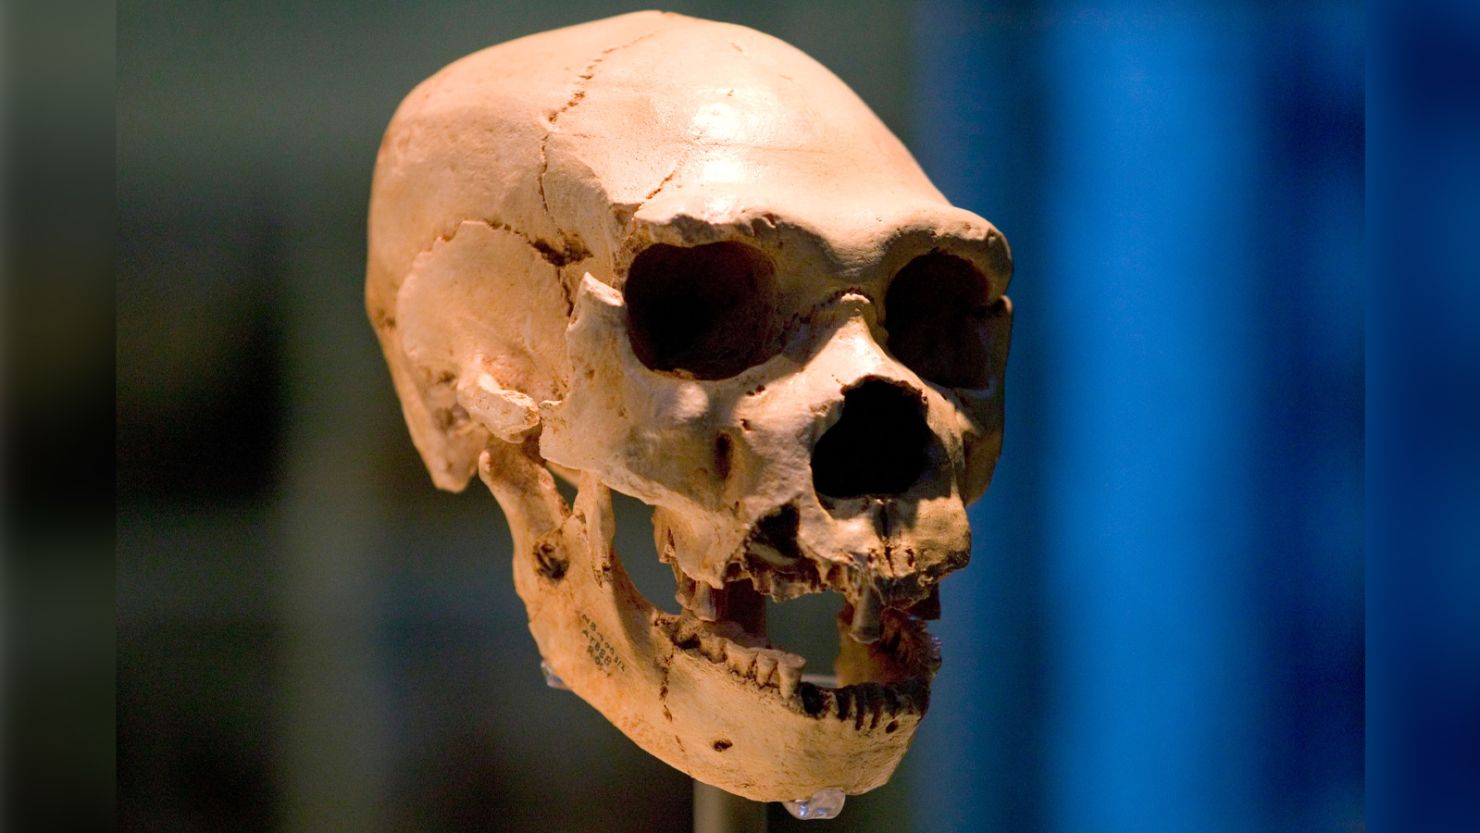 A skull belonging to Homo neanderthalensis. Most humans alive today can trace a very small percentage of their DNA to <a href="index.php?page=&url=https%3A%2F%2Fwww.cnn.com%2F2022%2F10%2F19%2Feurope%2Fneanderthal-first-family-dna-scn%2Findex.html">Neanderthals</a>.